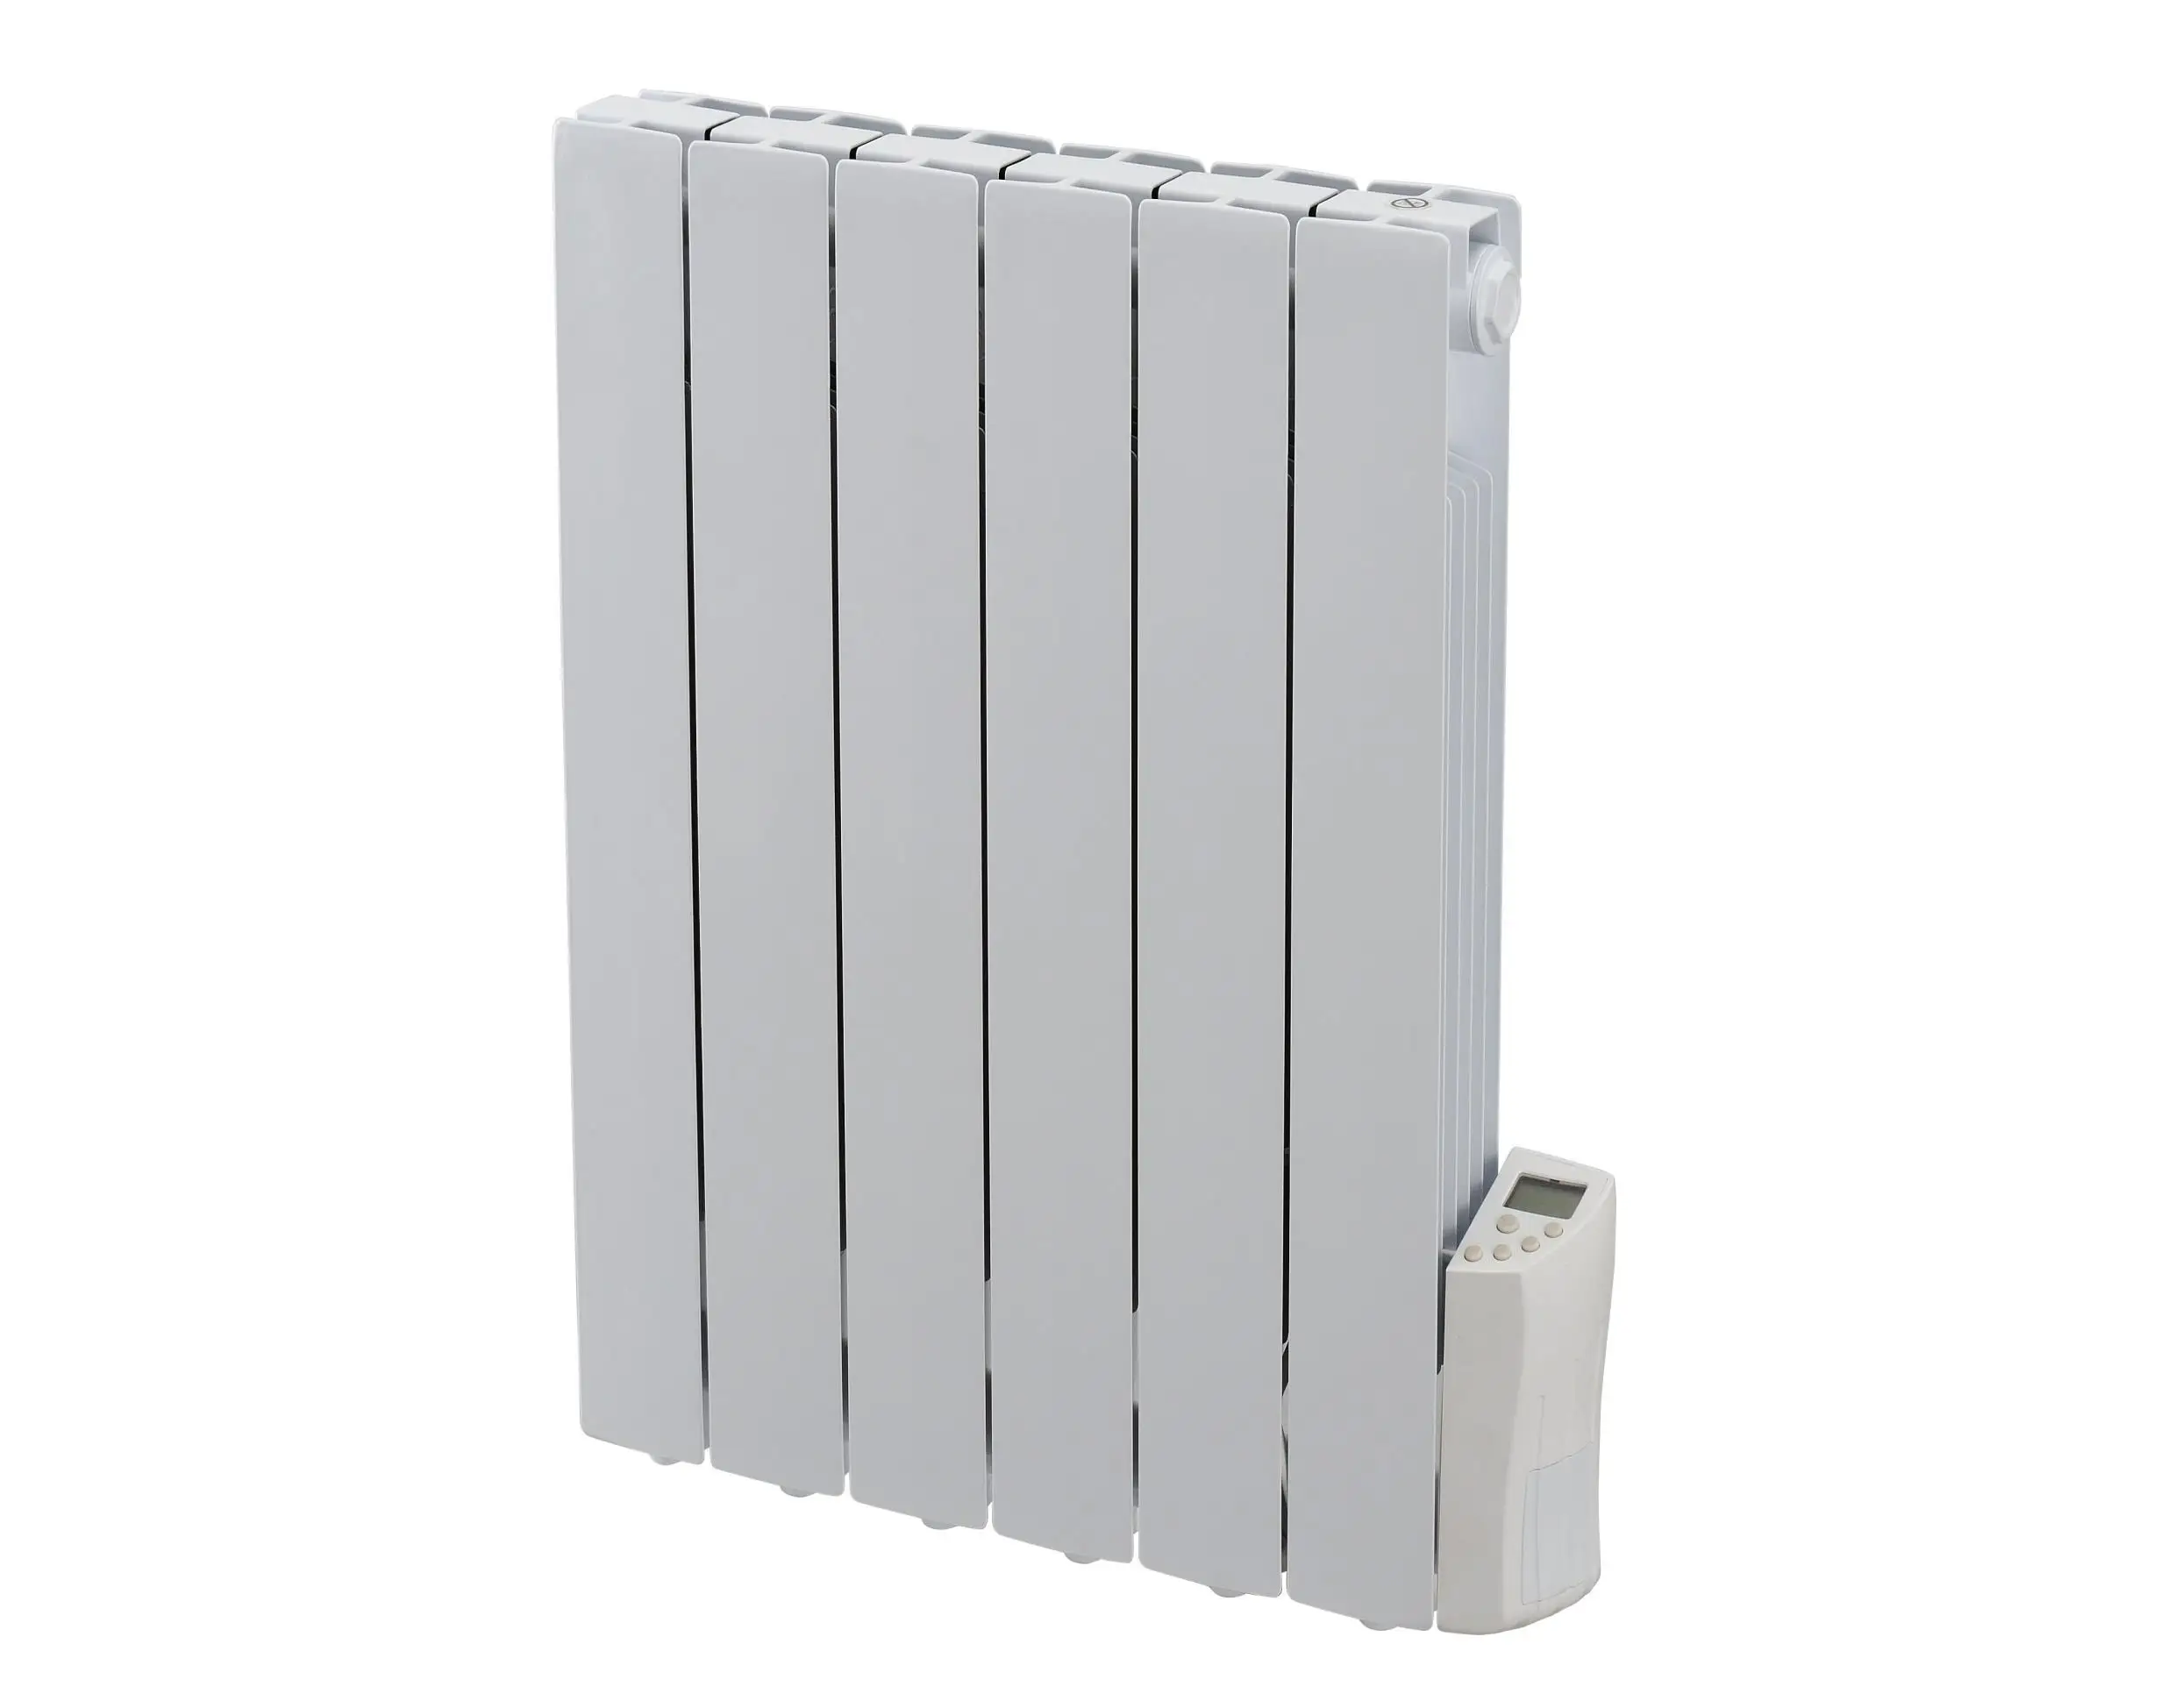 walgelijk Claire melodie Nf Electric Aluminum Oil Filled Radiator Heater 1000w With Programmable  Digital Timer Aluminium Wall Mounted - Buy Nf Radiators,Aluminum Oil  Radiator,Electric Aluminum Radiator Product on Alibaba.com